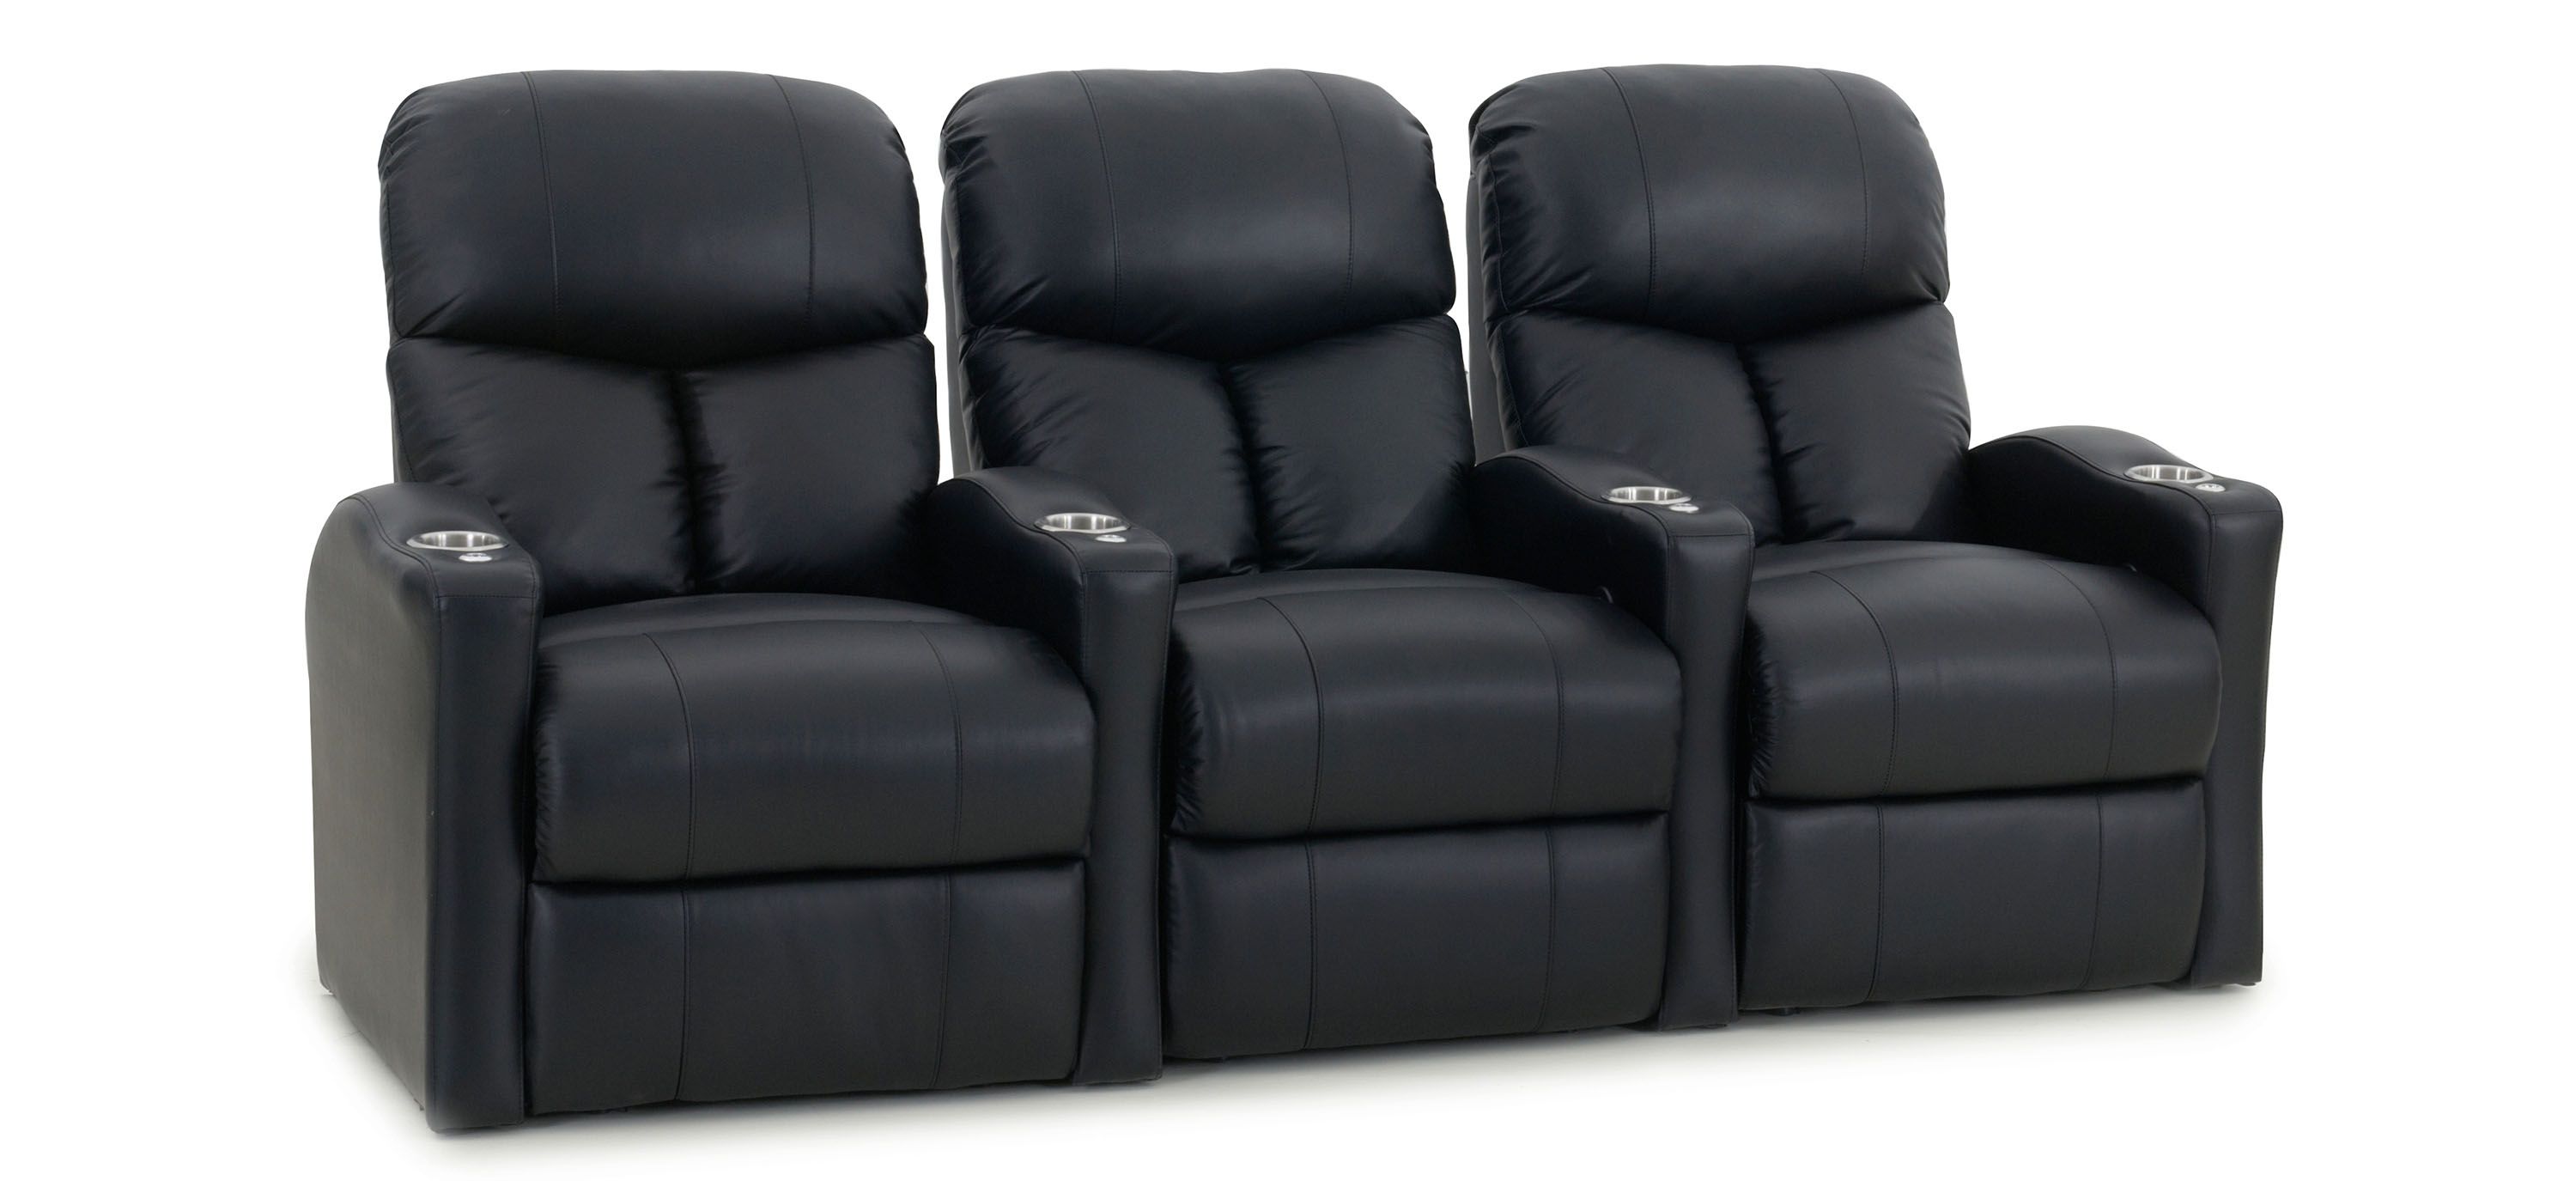 Midway 3-pc. Leather Reclining Sectional Sofa